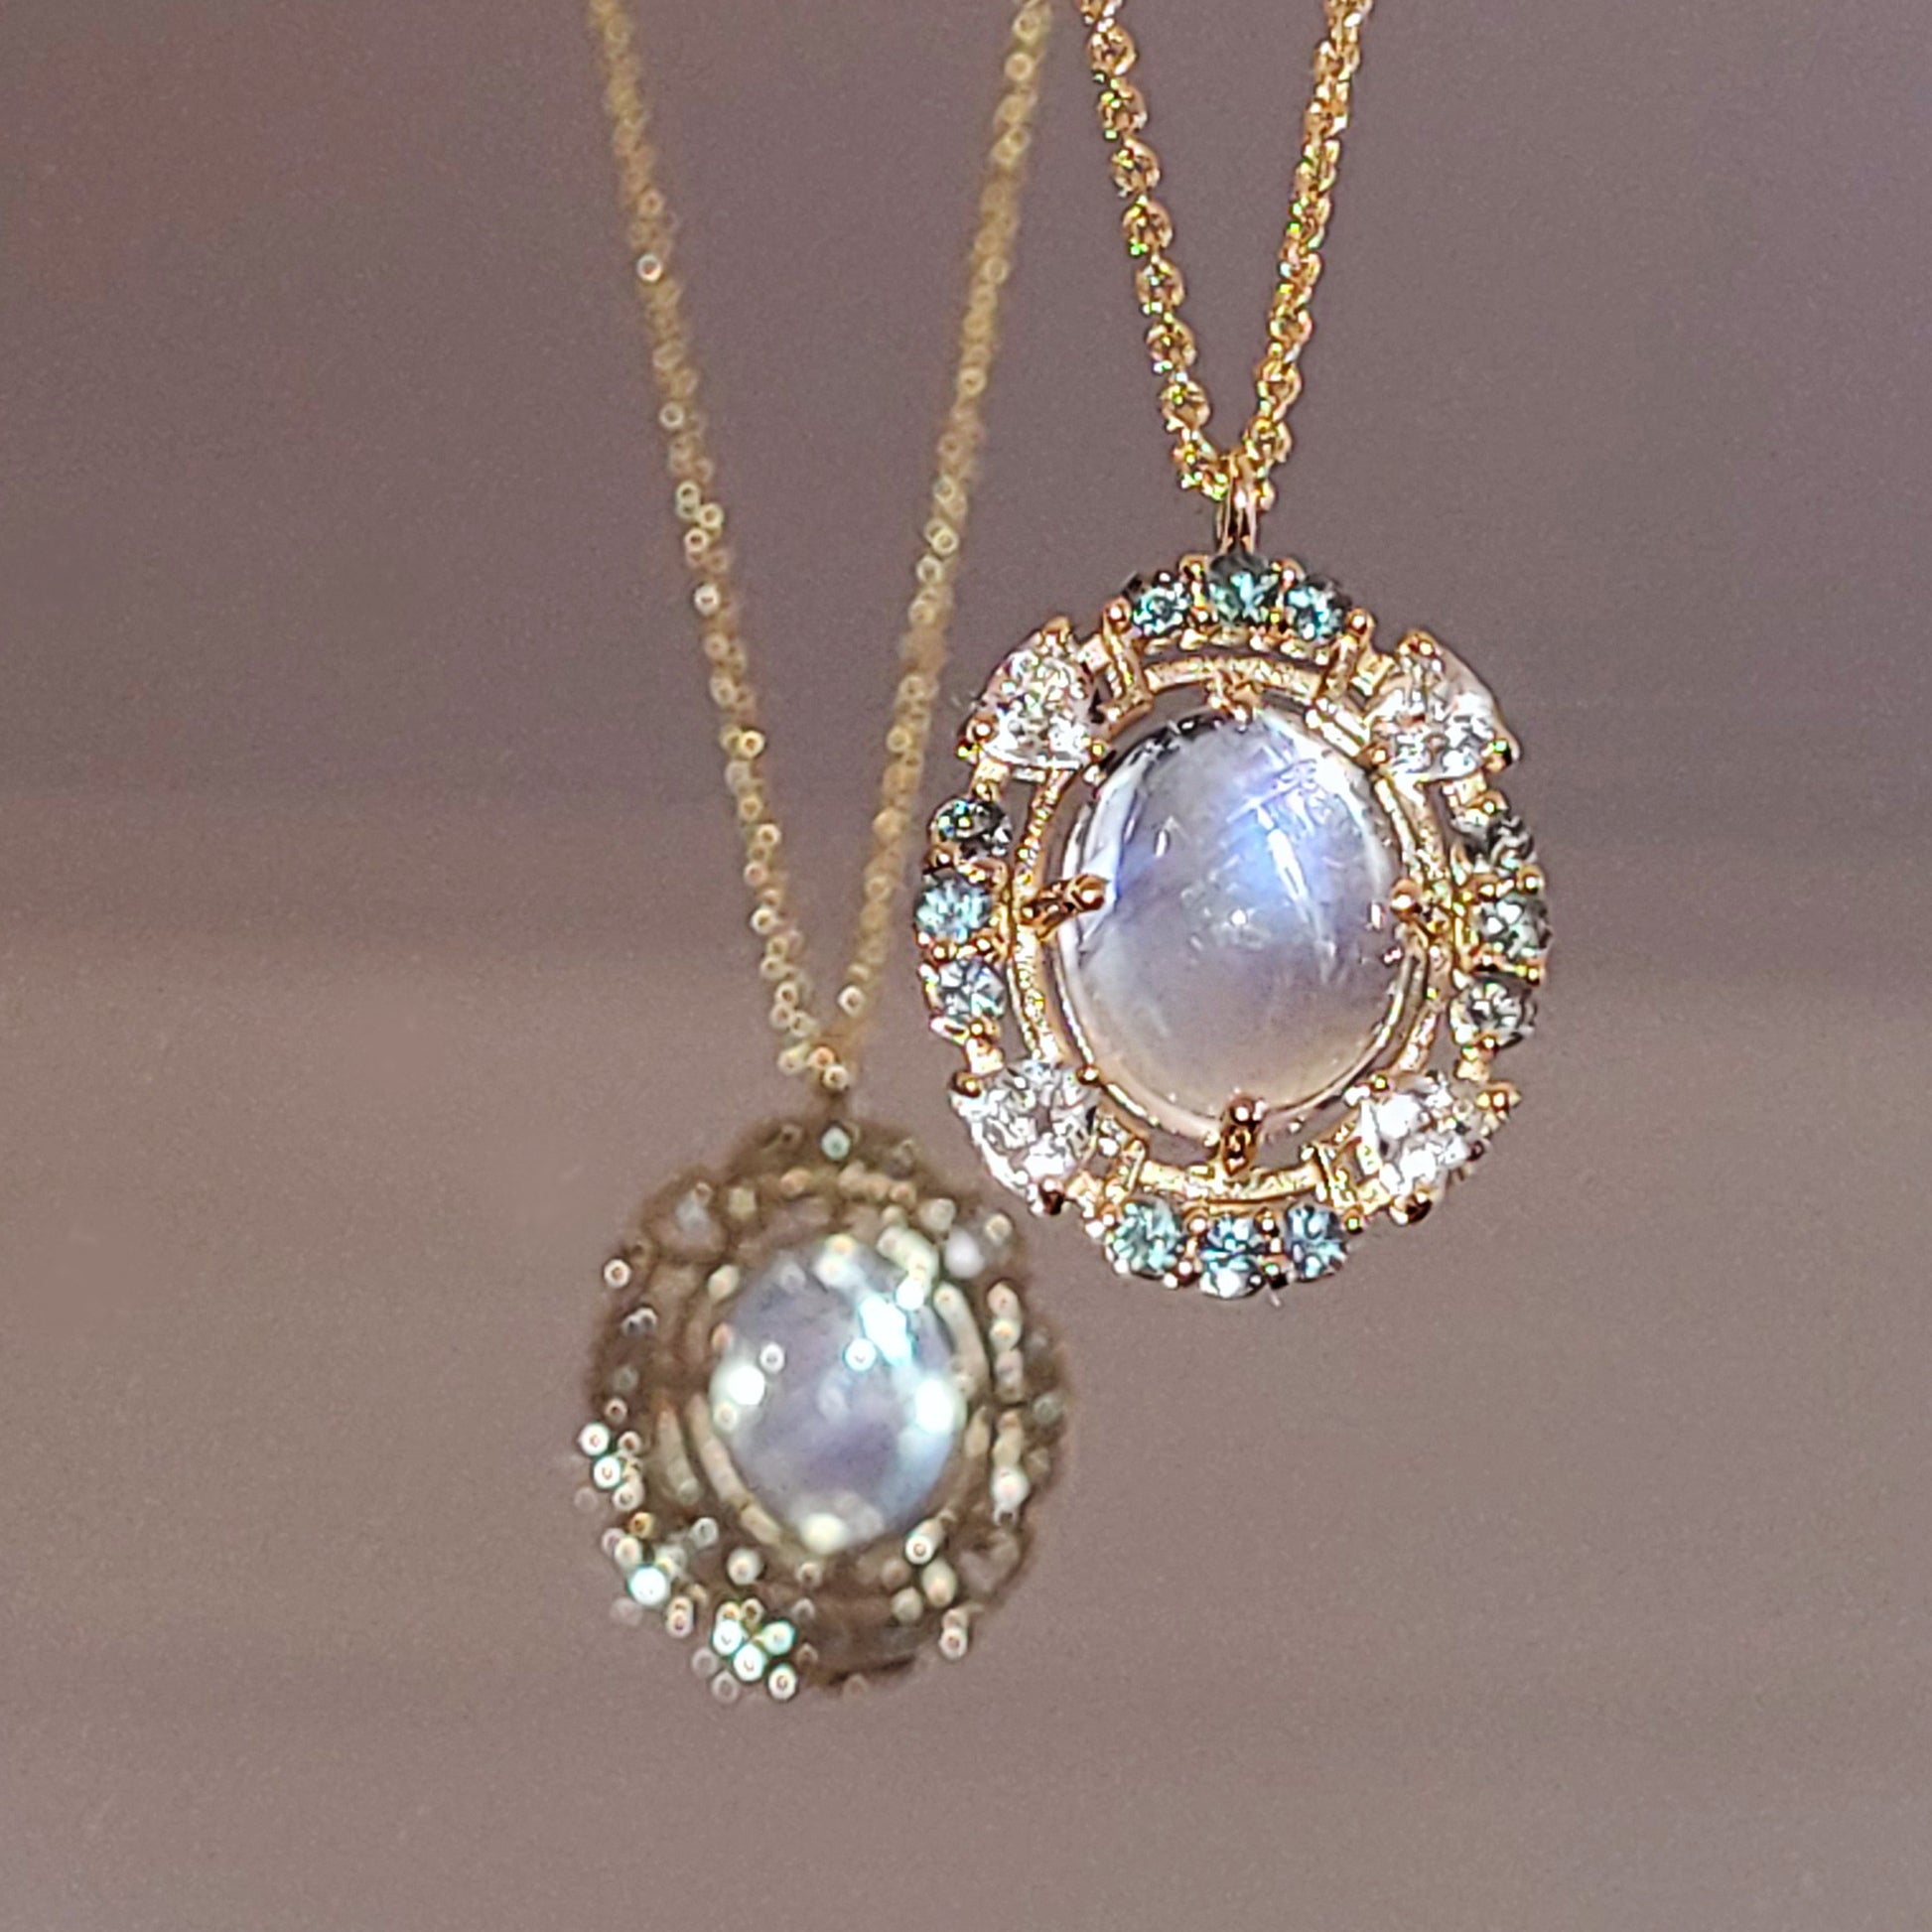 Birthstone necklace for mom, moonstone and alexandrite, the June birthstone